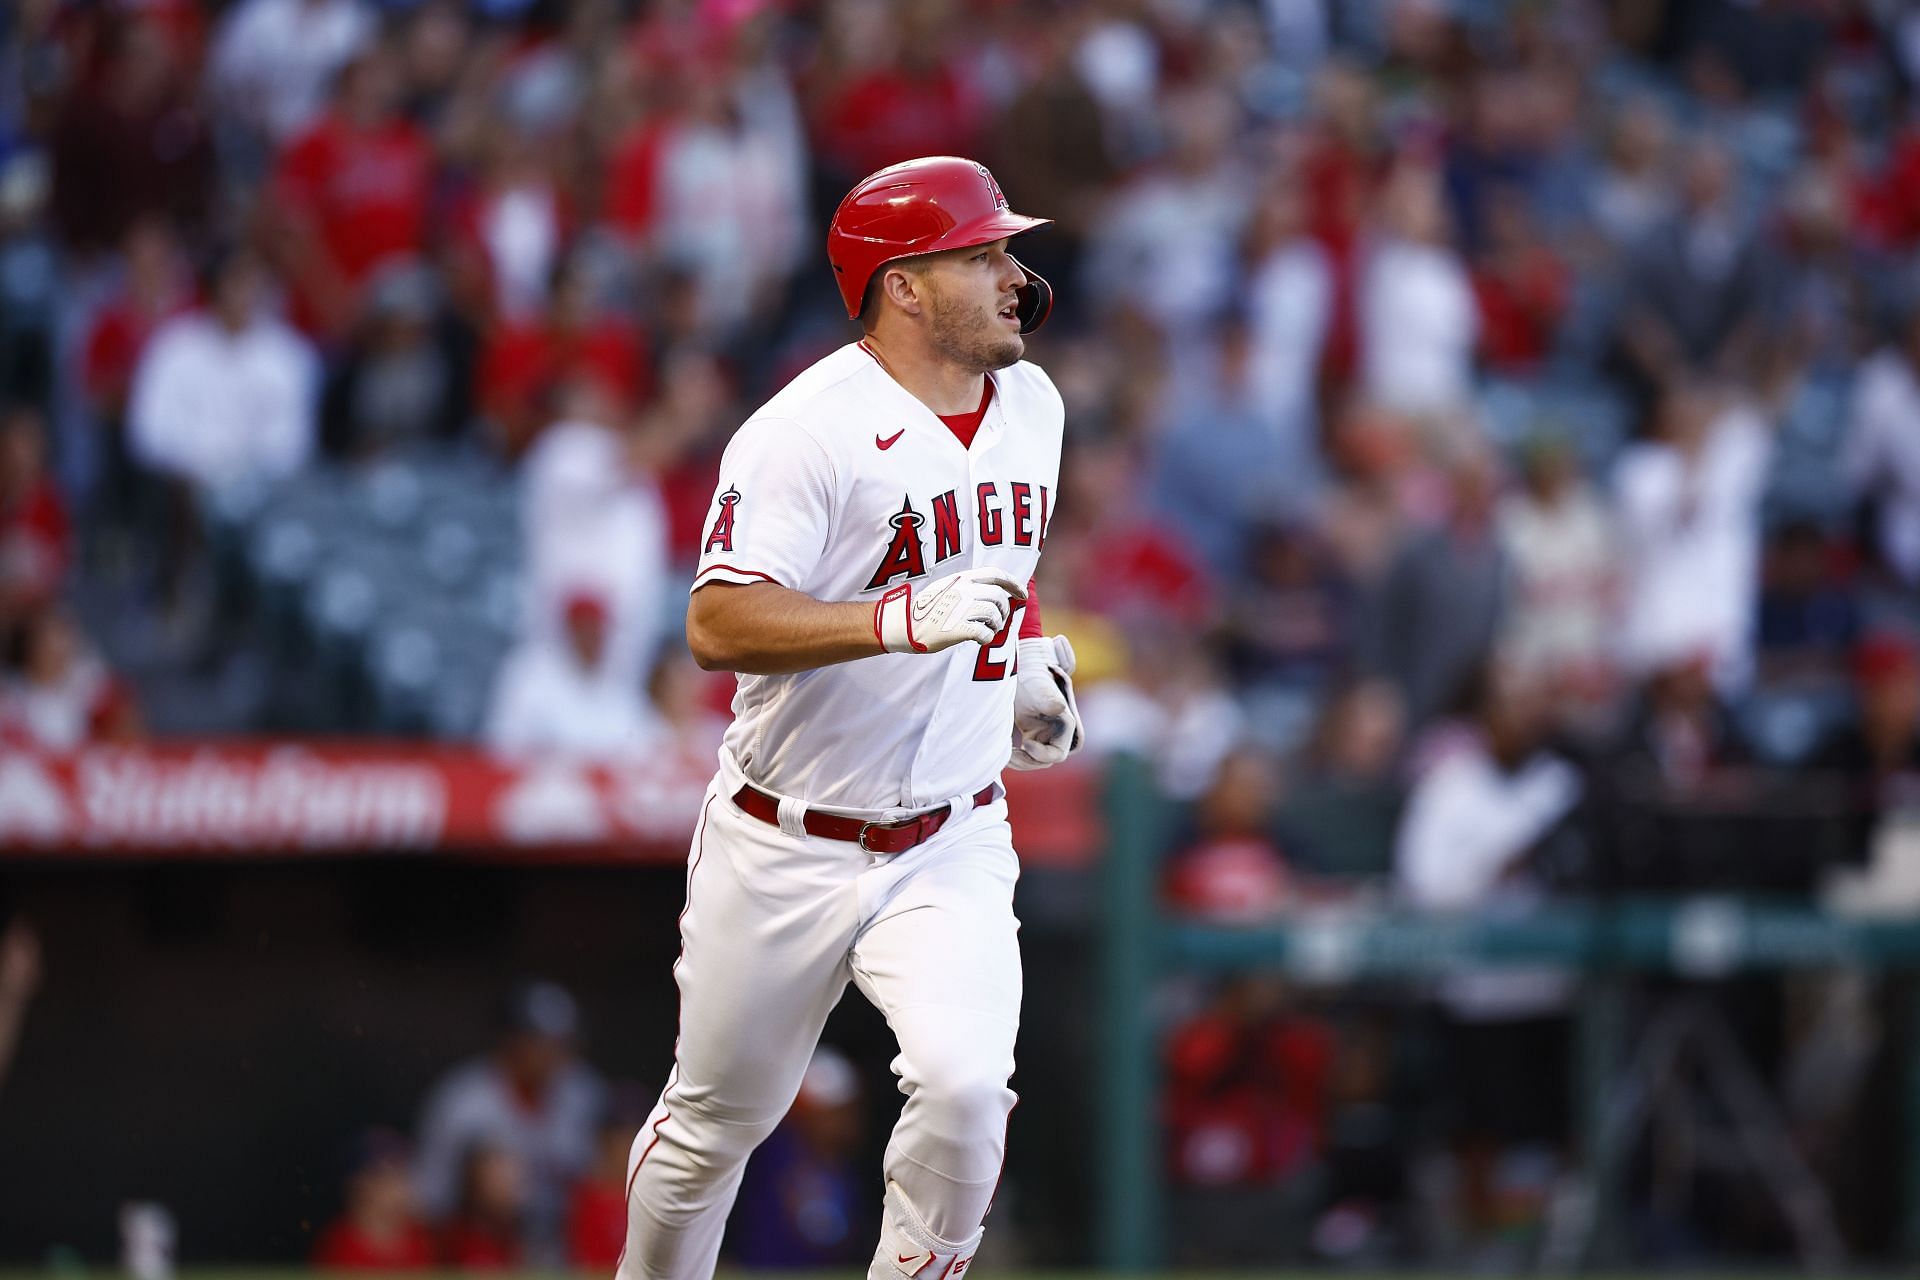 Angels' Mike Trout has rare back injury, may linger rest of career